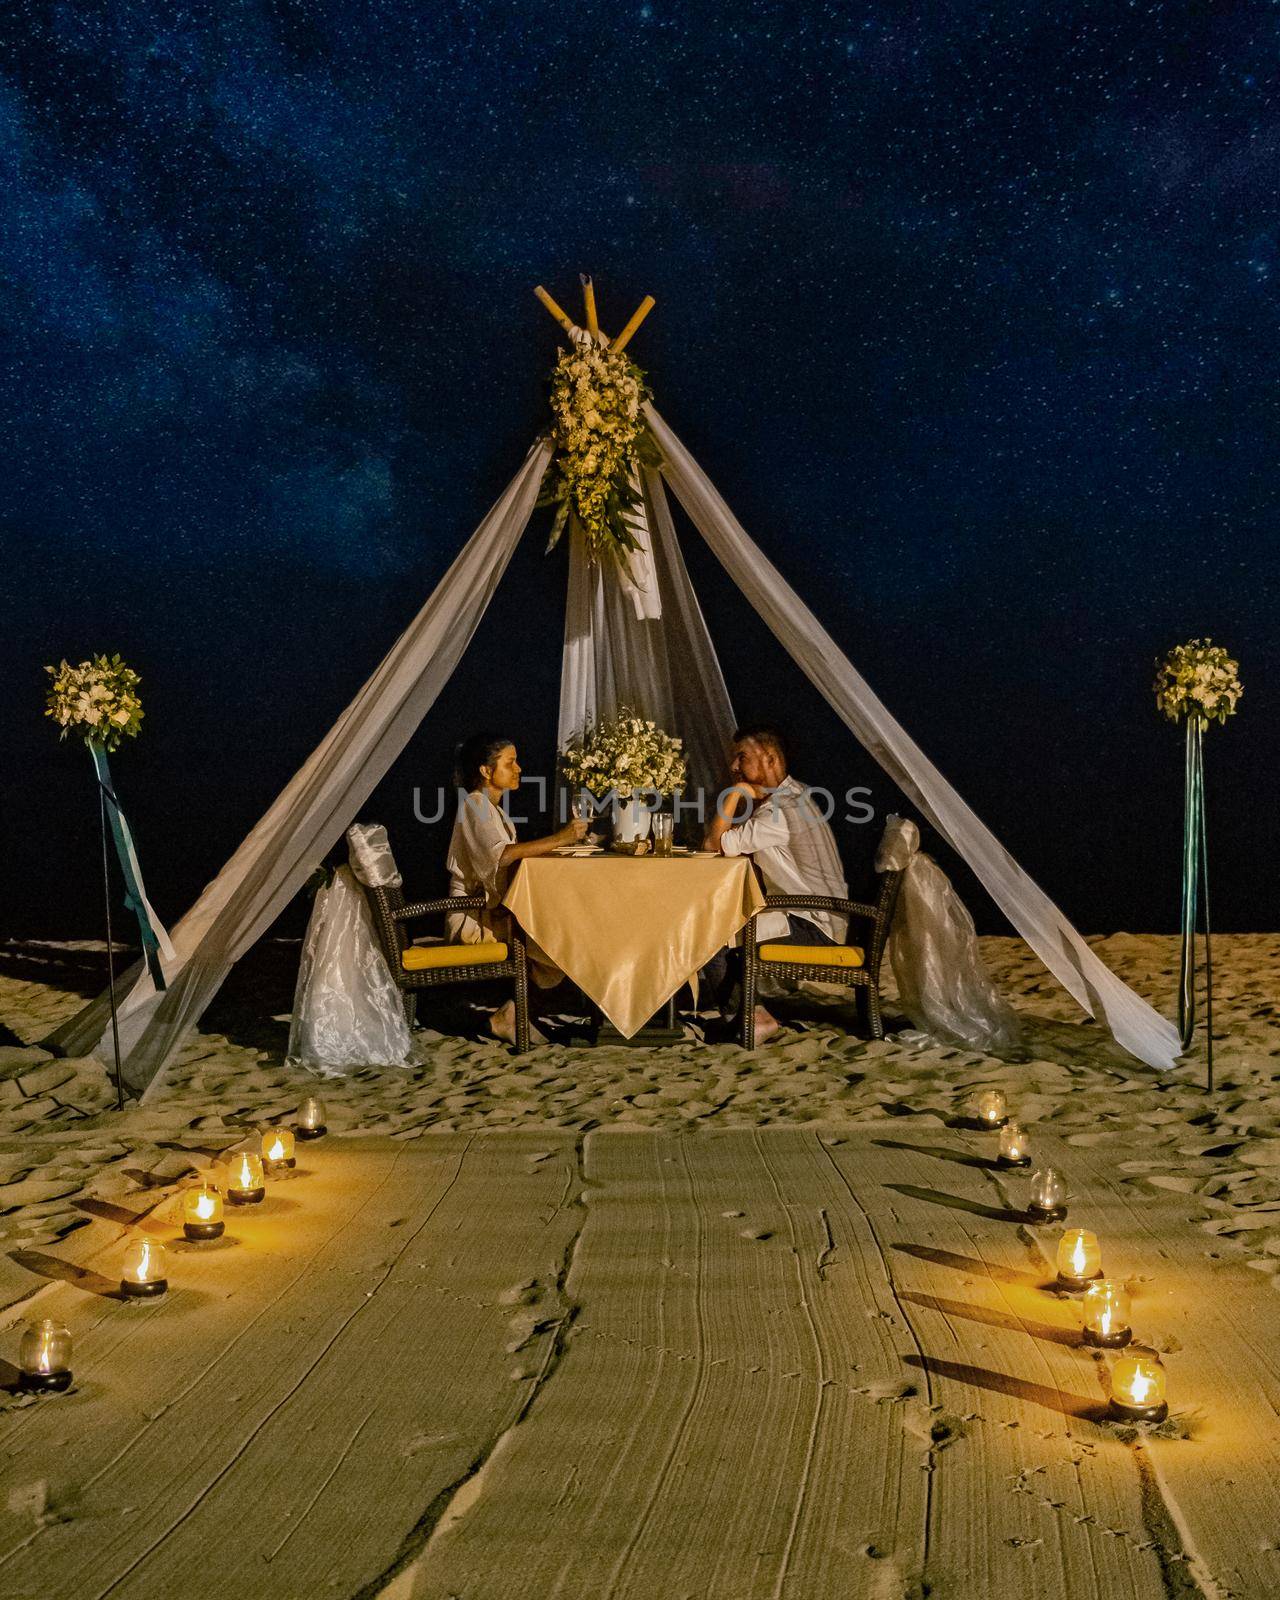 couple men and woman having romantic dinner with candle lights on the beach in Thailand, European men and Asian woman dinner on the beach Valentine concept by fokkebok